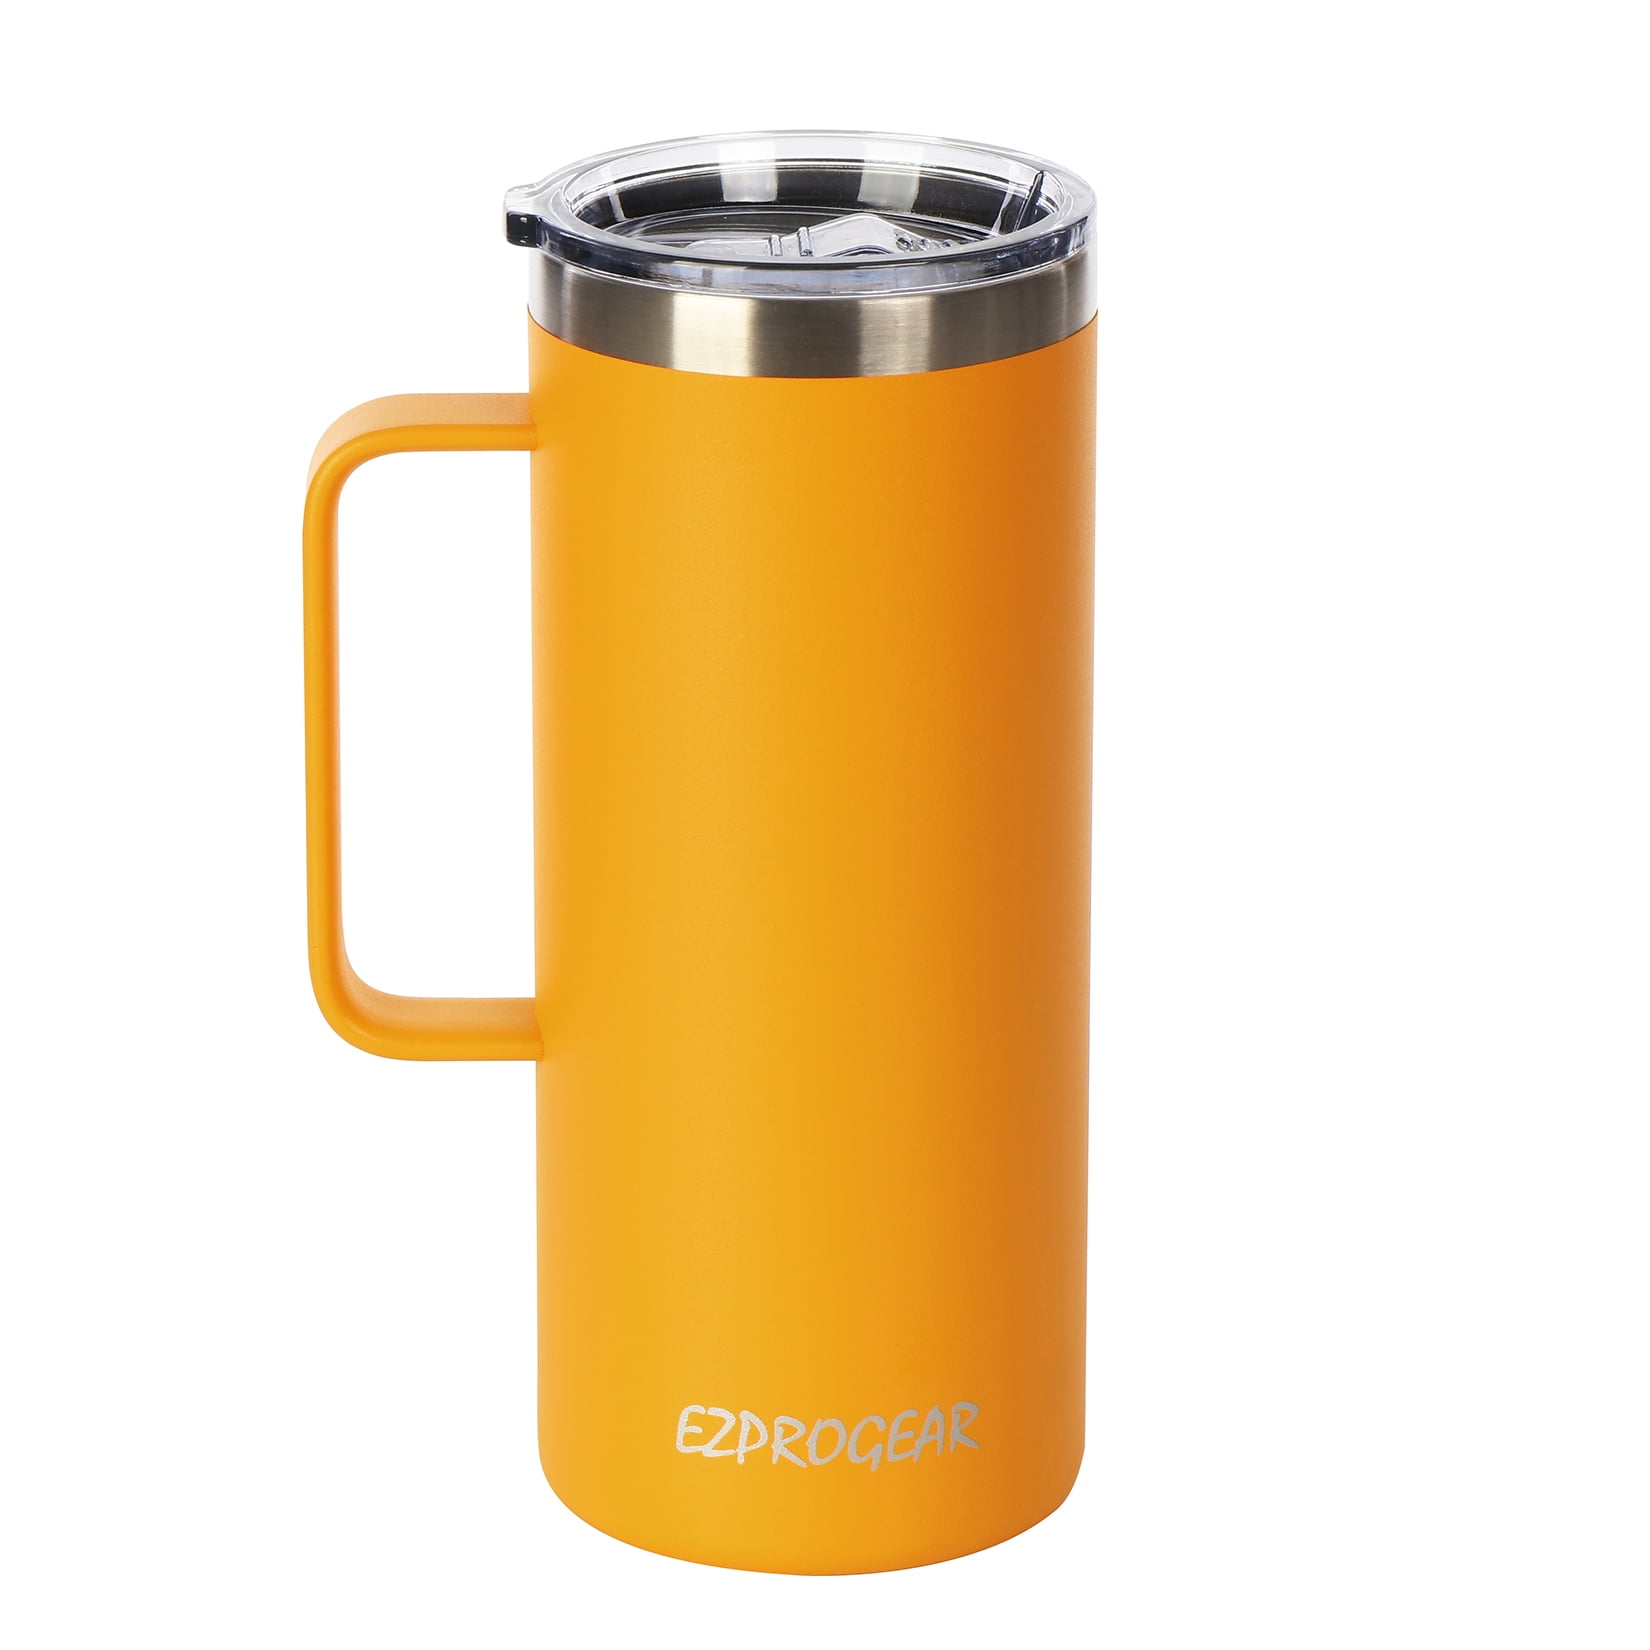 yoelike 32OZ Tumbler With Handle, Stainless Steel Vacuum Insulated Coffee  Mug Cup for Travel, Home, …See more yoelike 32OZ Tumbler With Handle